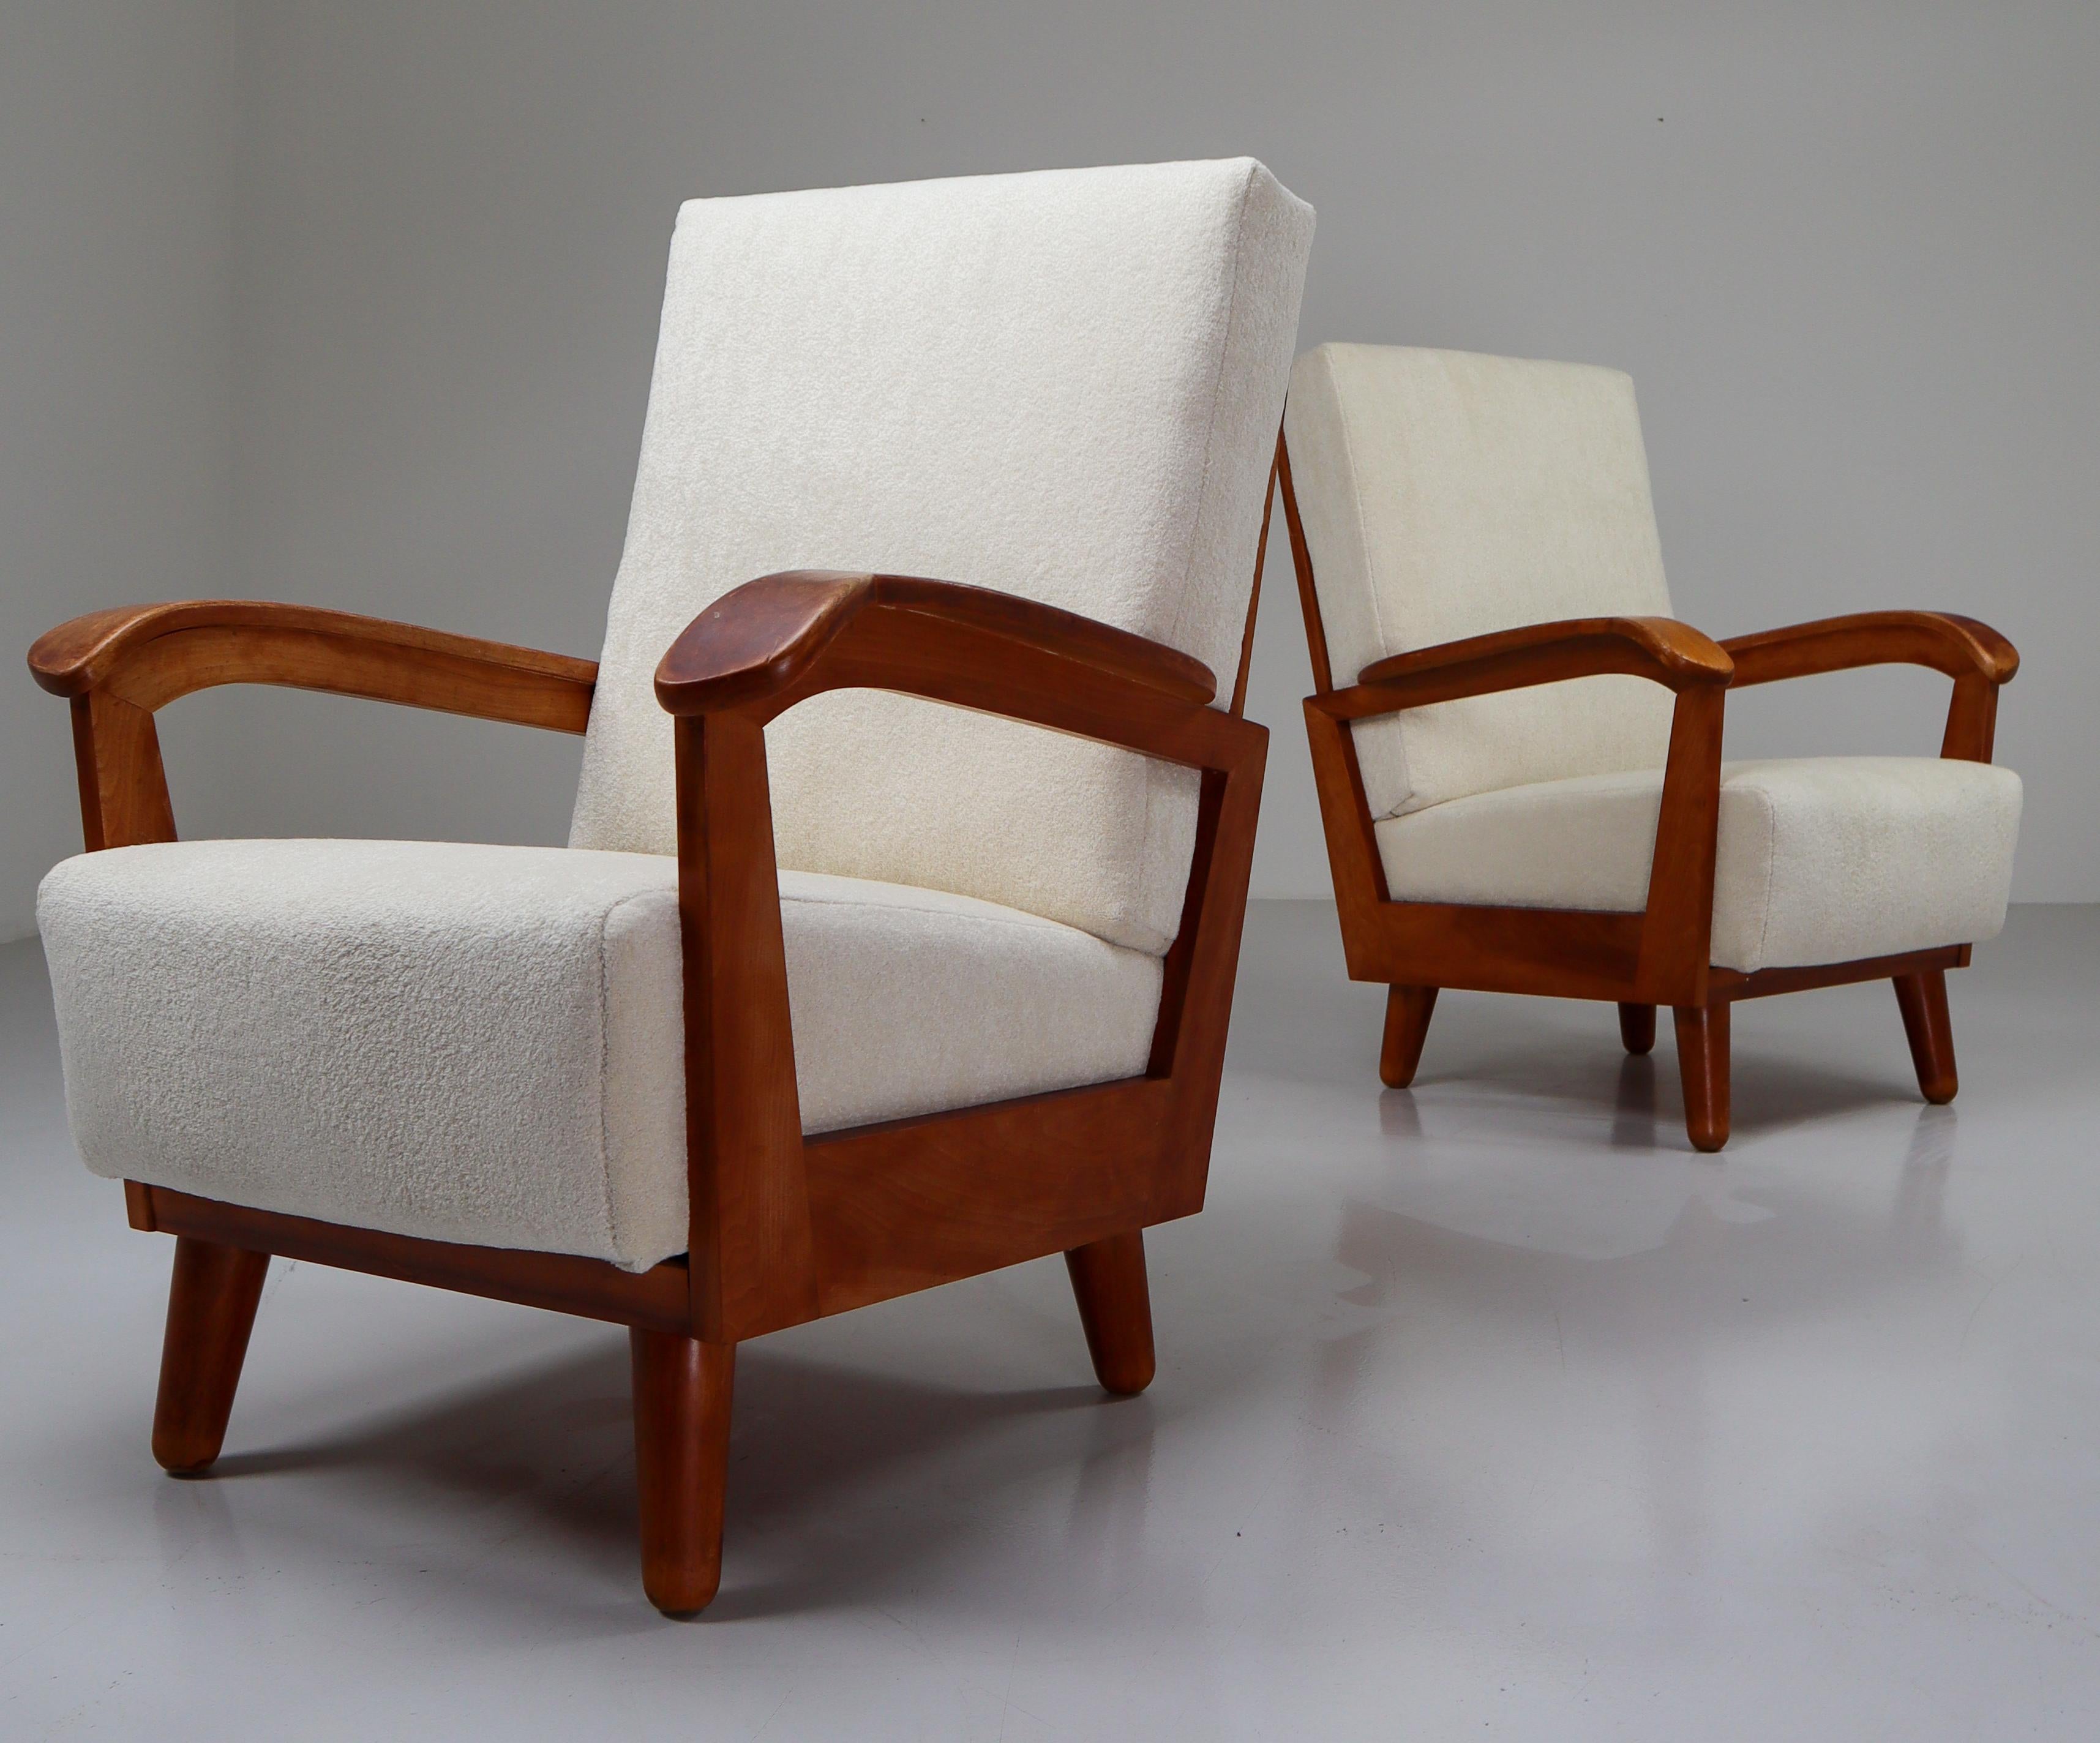 French Midcentury Armchairs in Walnut and Reupholstered in Off-White Wool Fabric 1